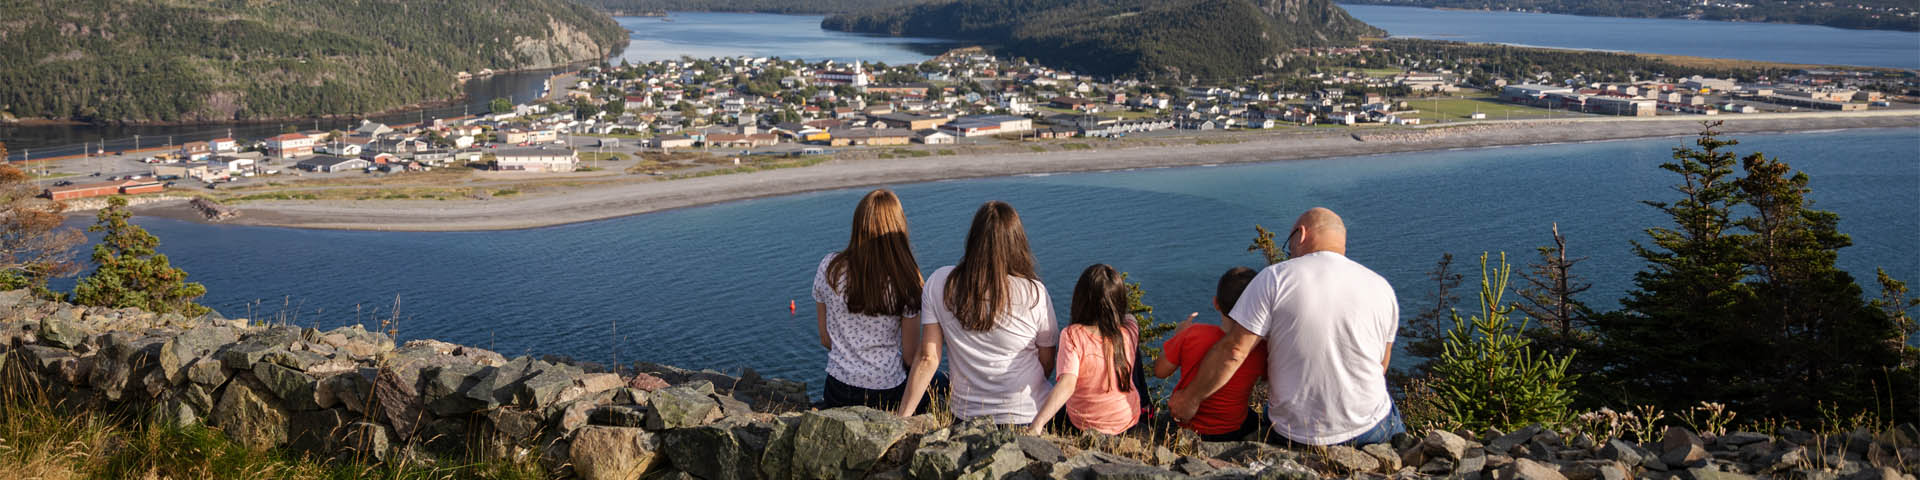 a family of five sitting on a stone wall overlooking an ocean-side town